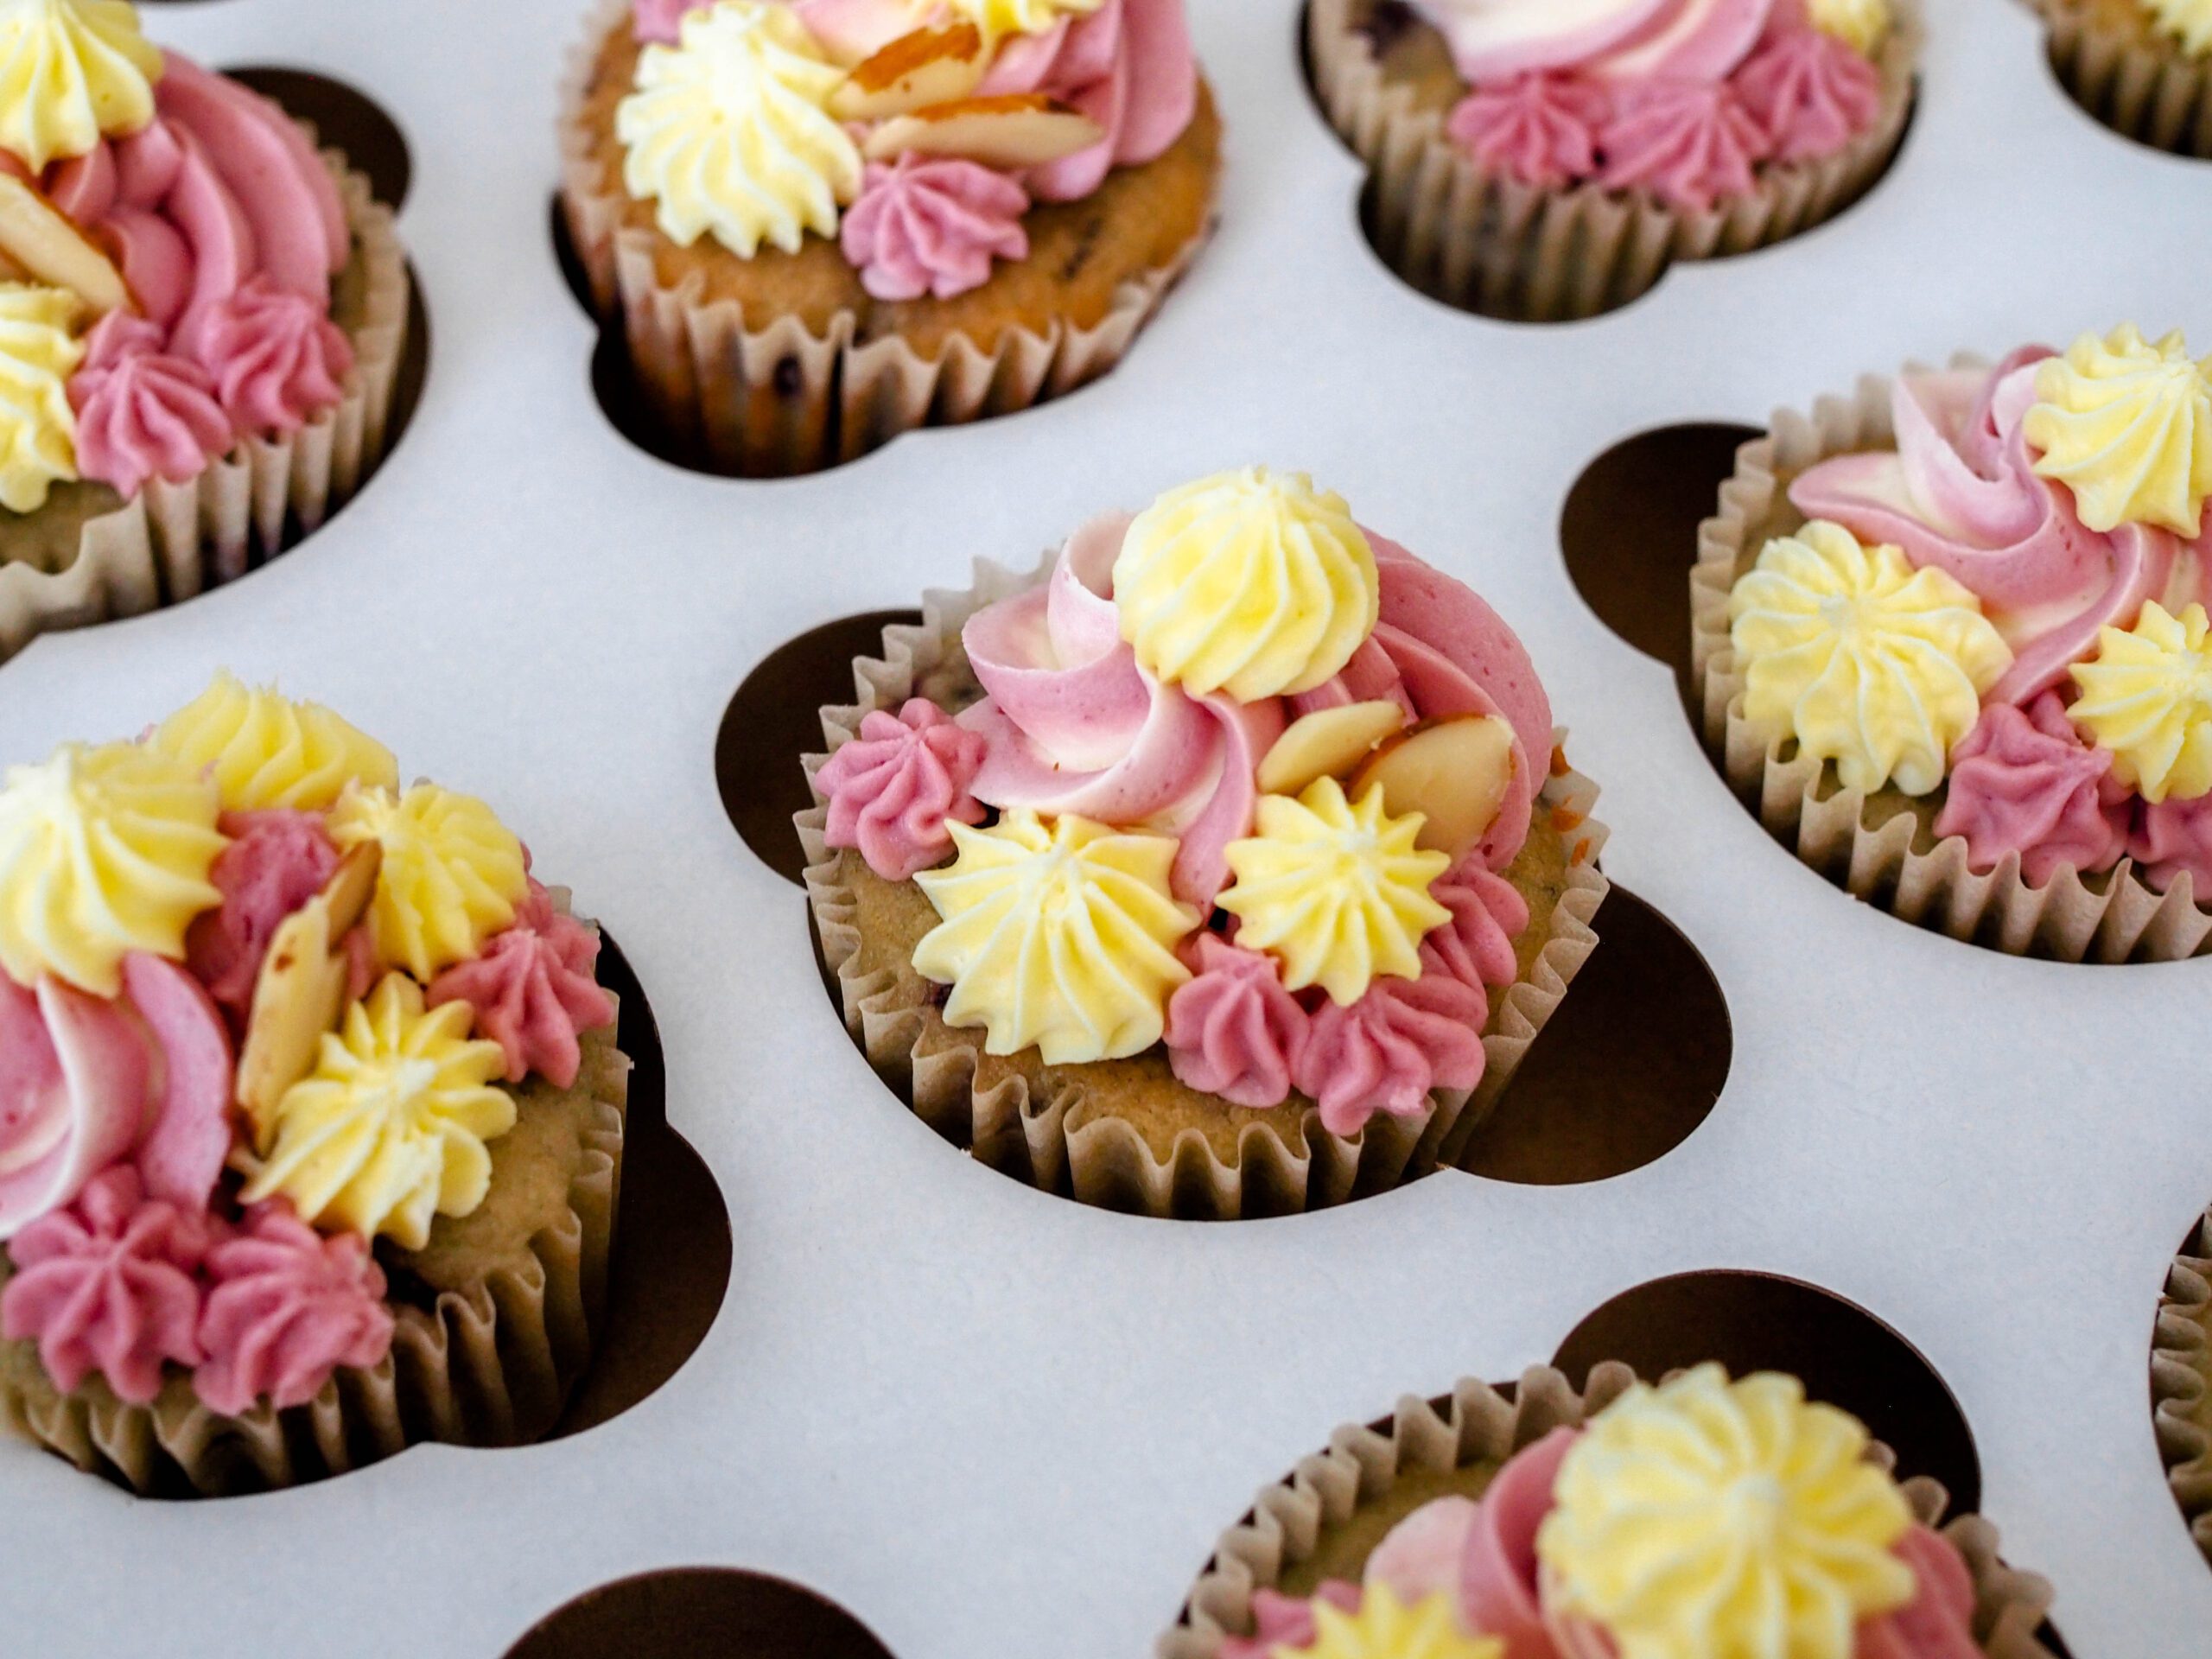 A cherry almond cupcake, decorated with yellow and pink frosting and topped with two almonds.